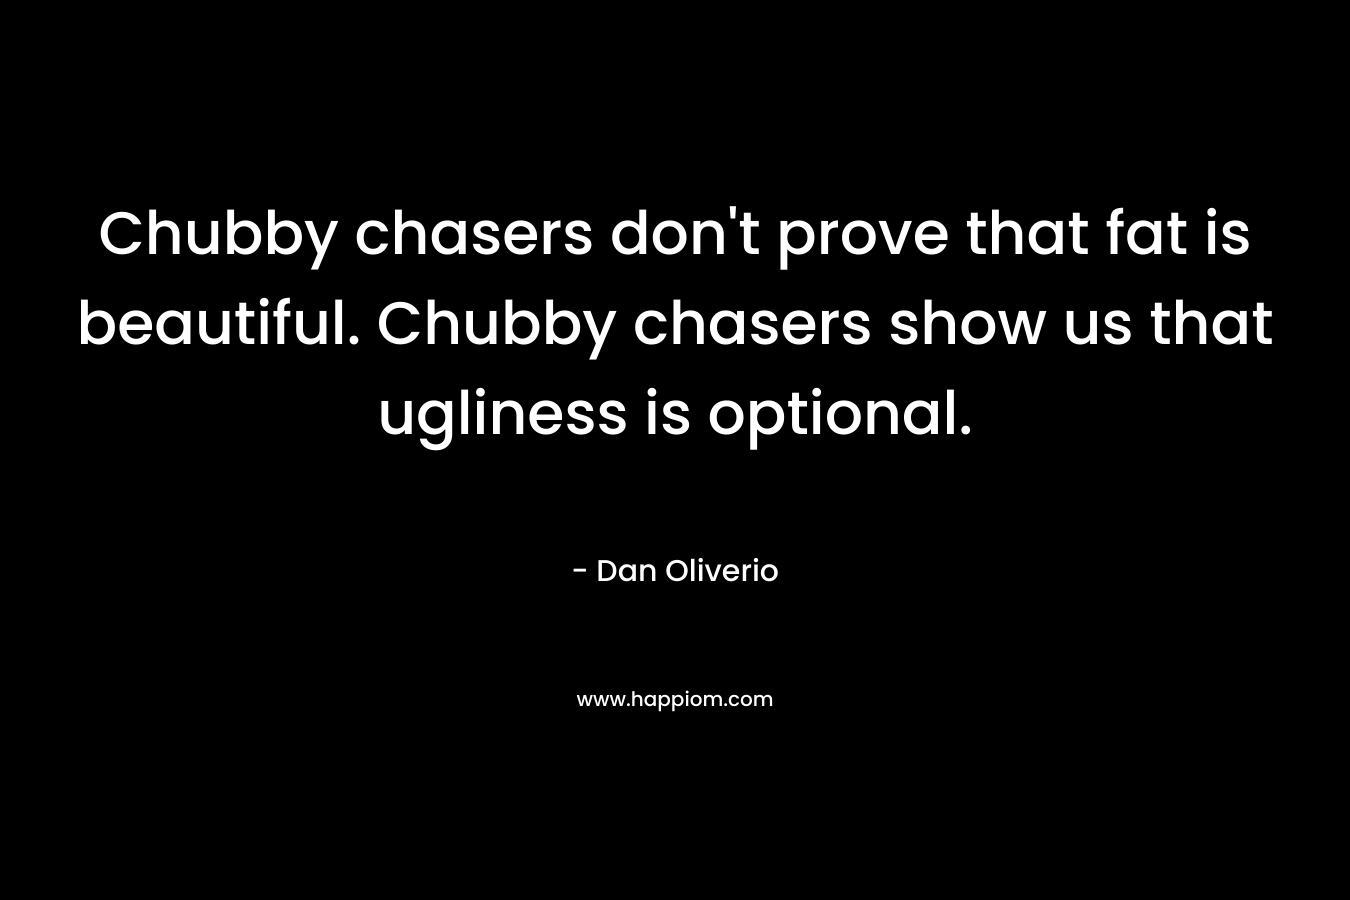 Chubby chasers don’t prove that fat is beautiful. Chubby chasers show us that ugliness is optional. – Dan Oliverio